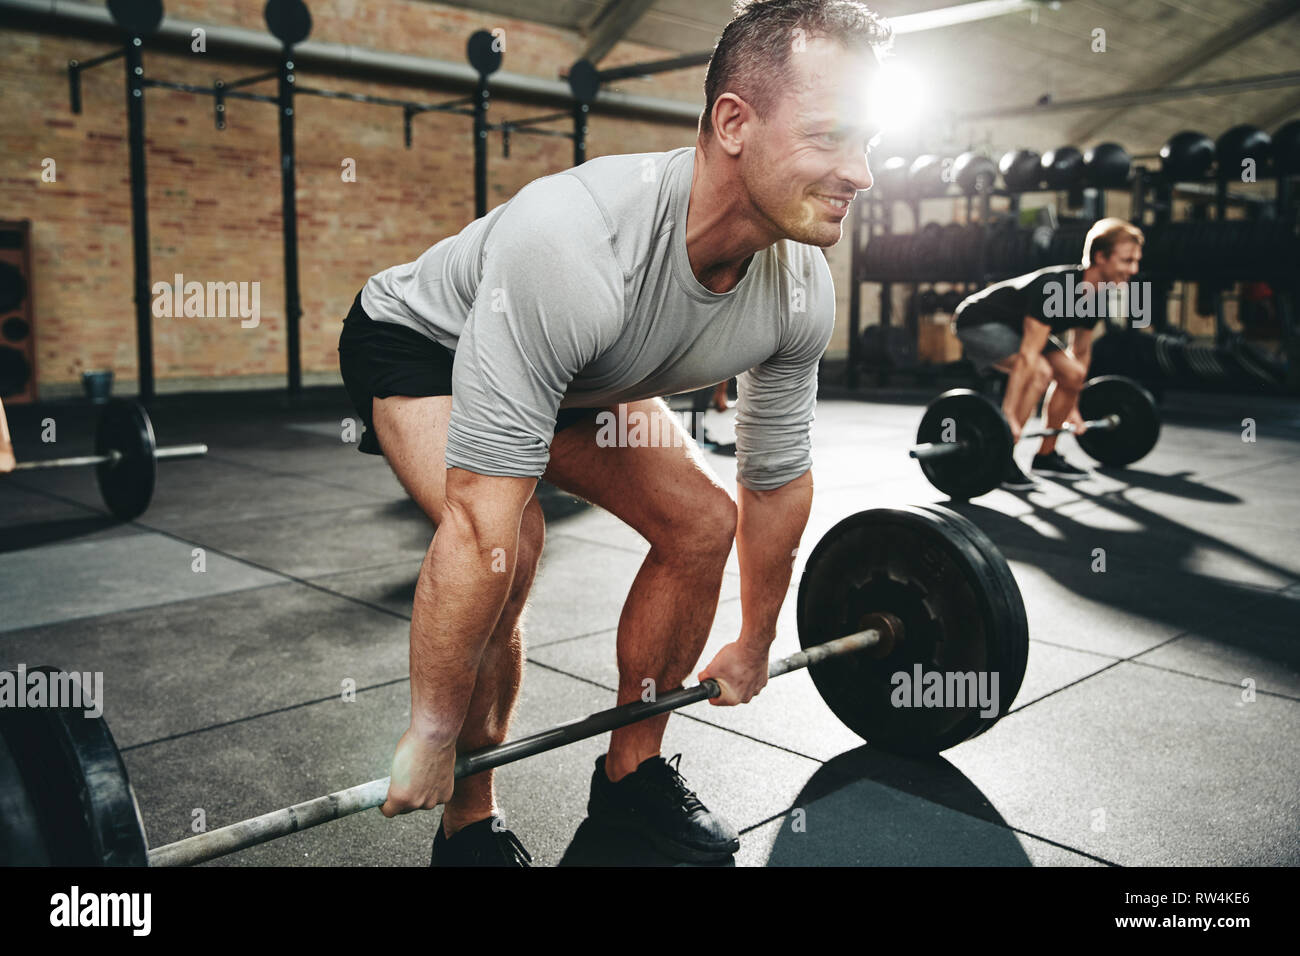 Fit man in sportswear smiling while preparing to lift weights during a weight training session at the gym Stock Photo